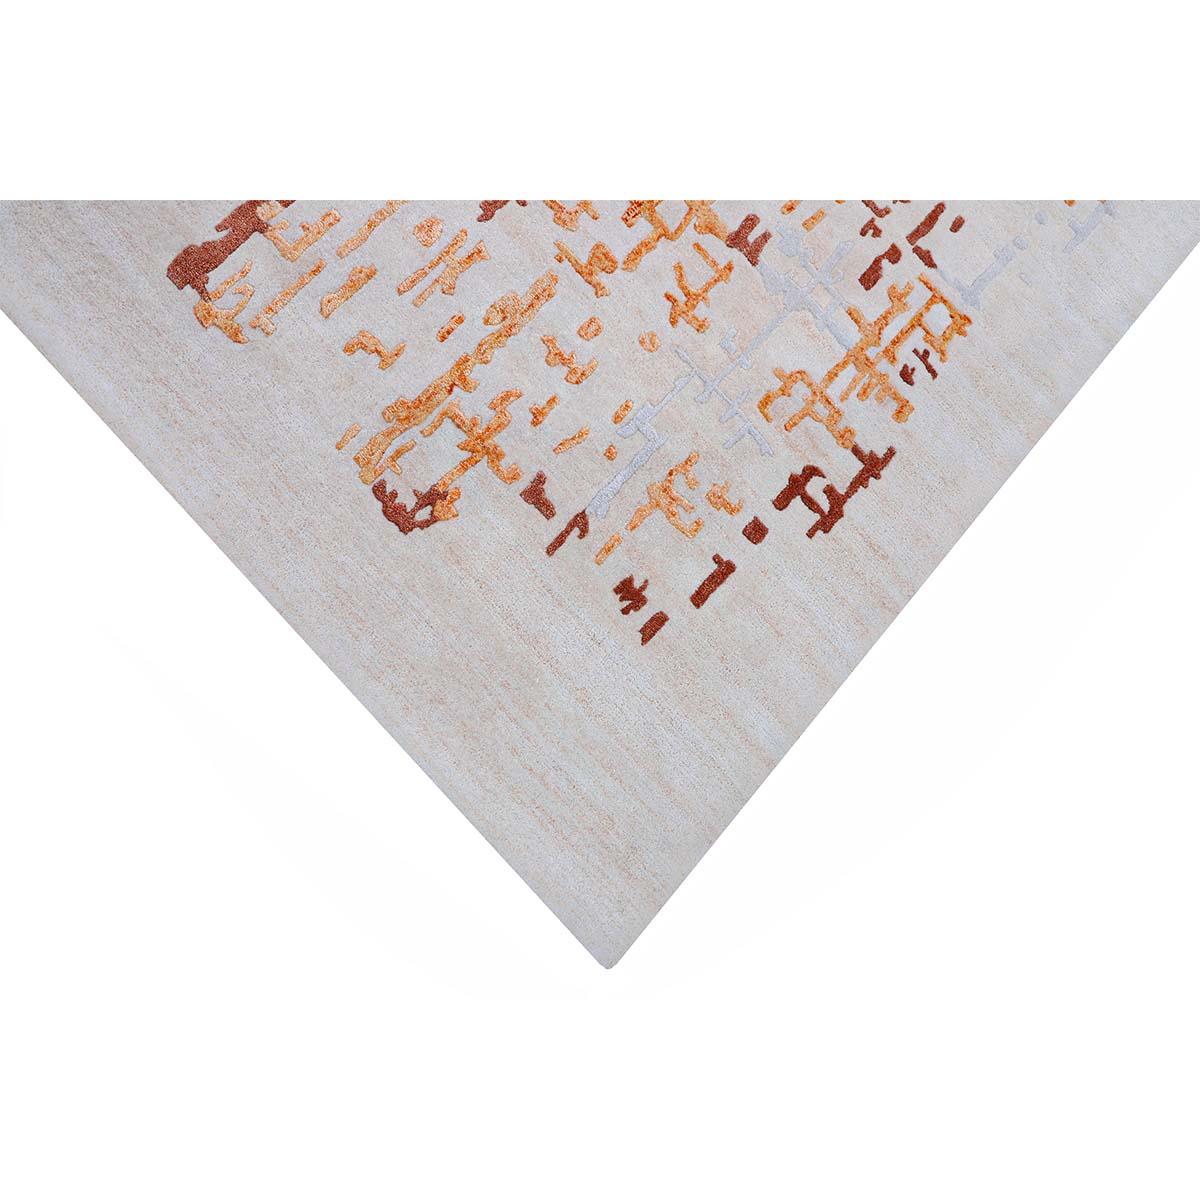 Make a room sit up with these contemporary style rugs. This modern orange and ivory design, along with the use of wool and viscose, creates a soft and subtle effect with a pattern that shimmers in the light. Measures: 3' x 5'.